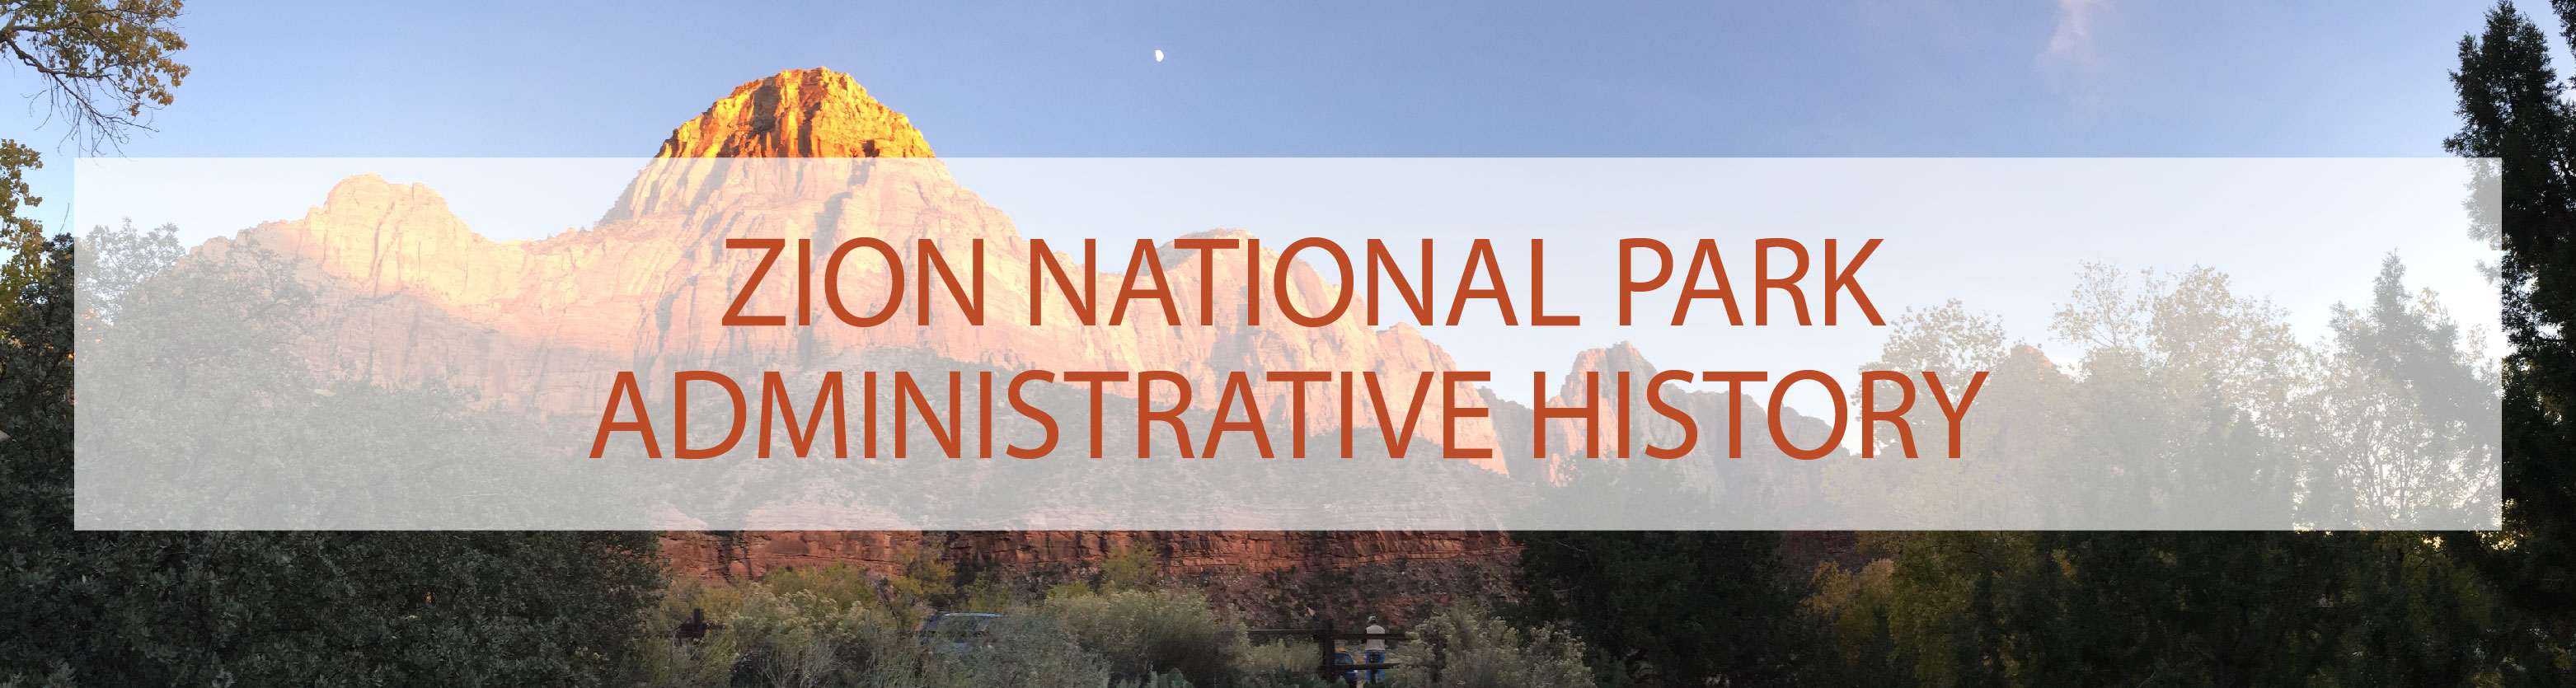 Zion National Park Administrative History 